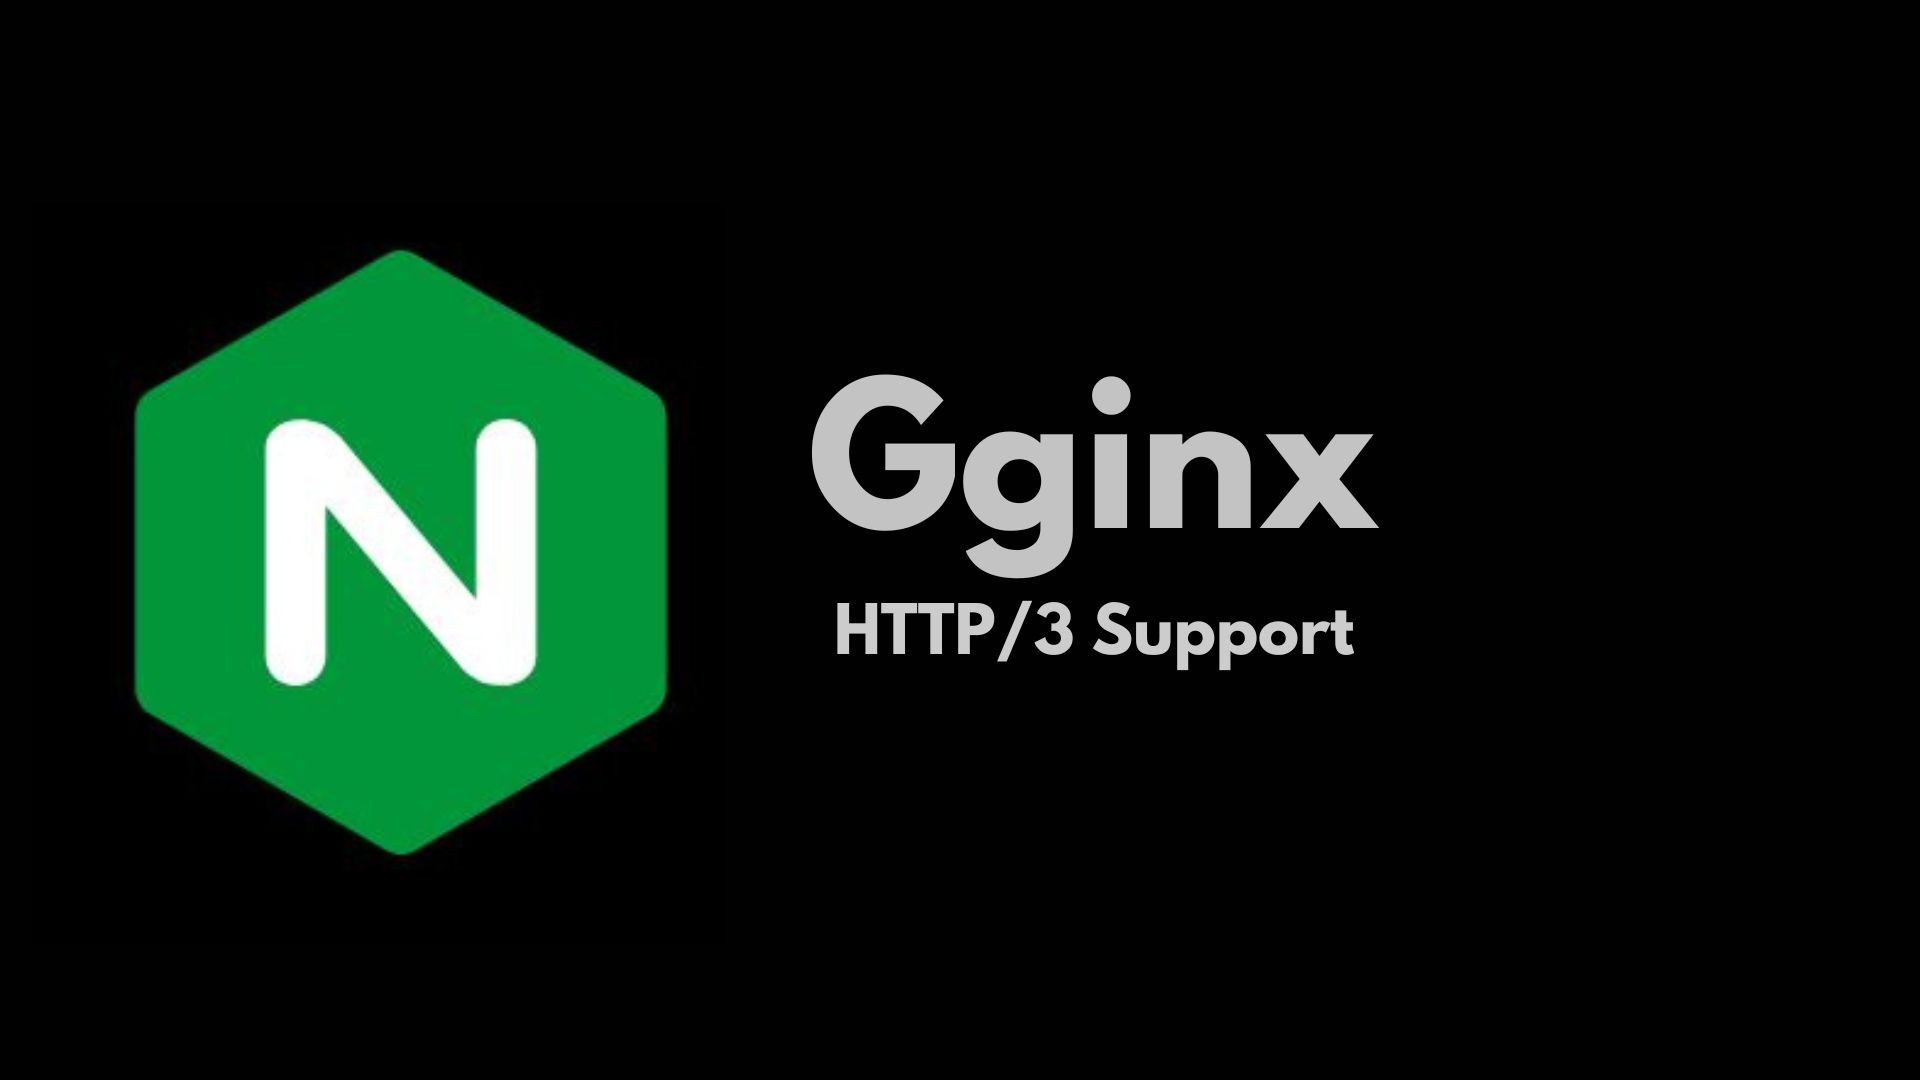 NGINX supports HTTP3